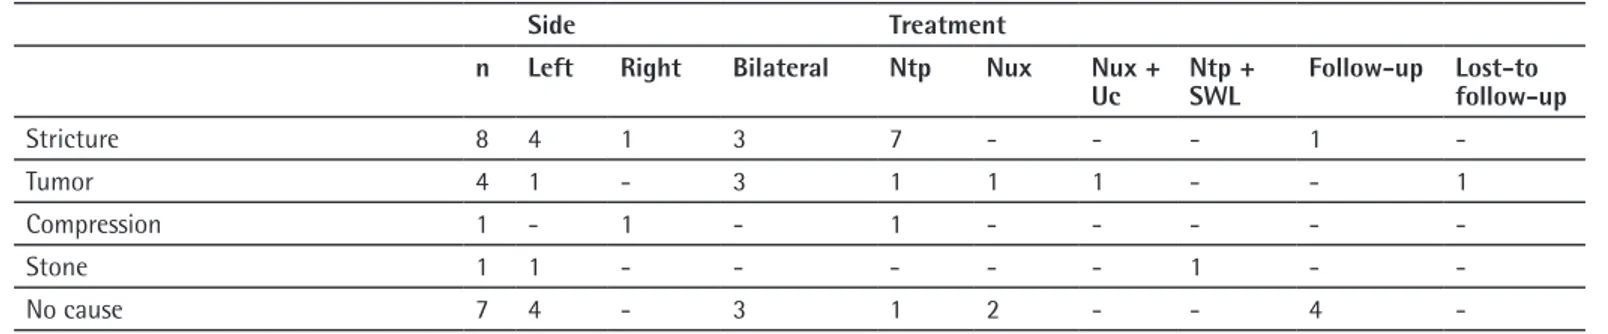 Table 4. Analysis of clinicopathological variables and  complications associated with renal function deterioration